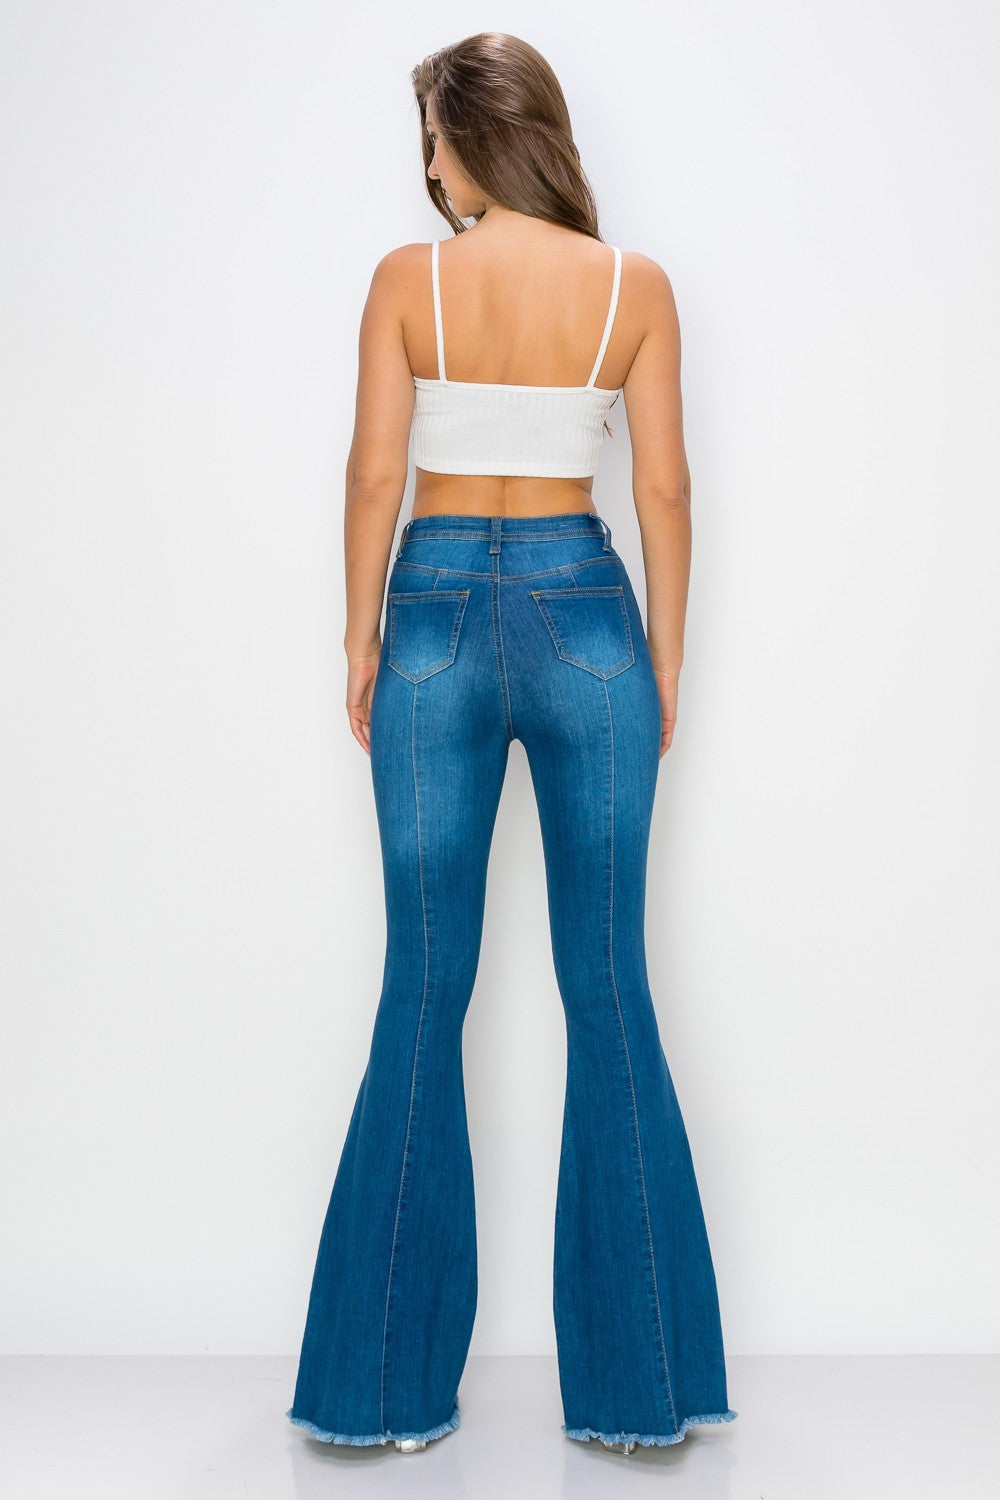 Ready for It High Rise Bell Bottom Jeans Mid Wash